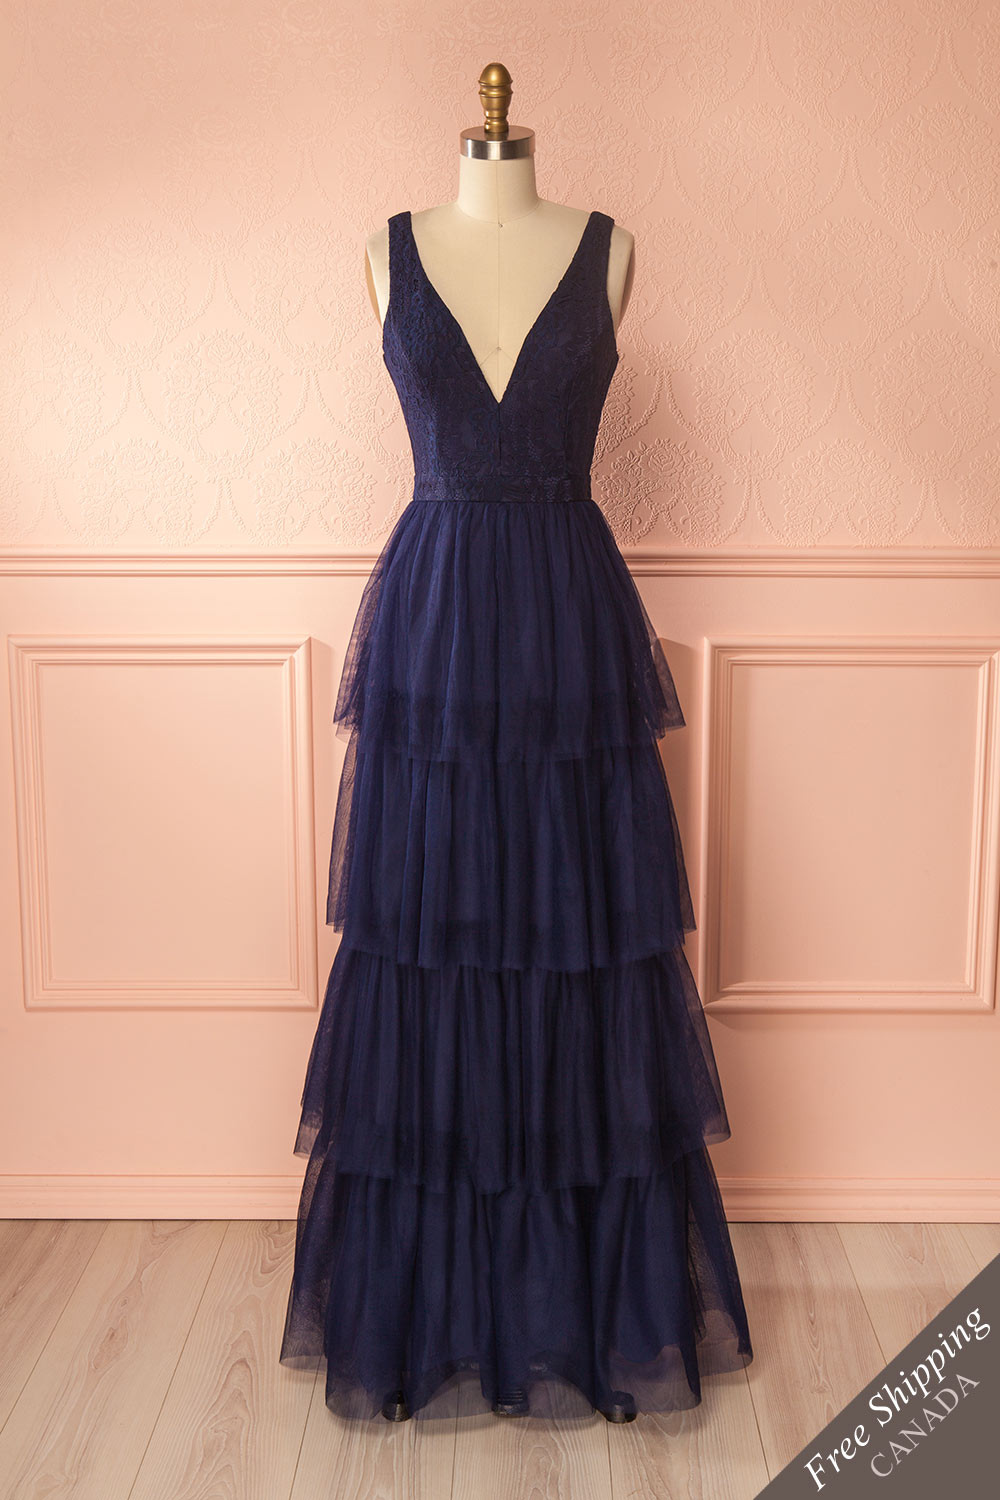 Deep V Neck A Line Long Tulle Navy Blue Lace Top Evening Dress,long Tulle Grey Lace Top Prom Dress,wedding Party Dress,a Line Long Tulle